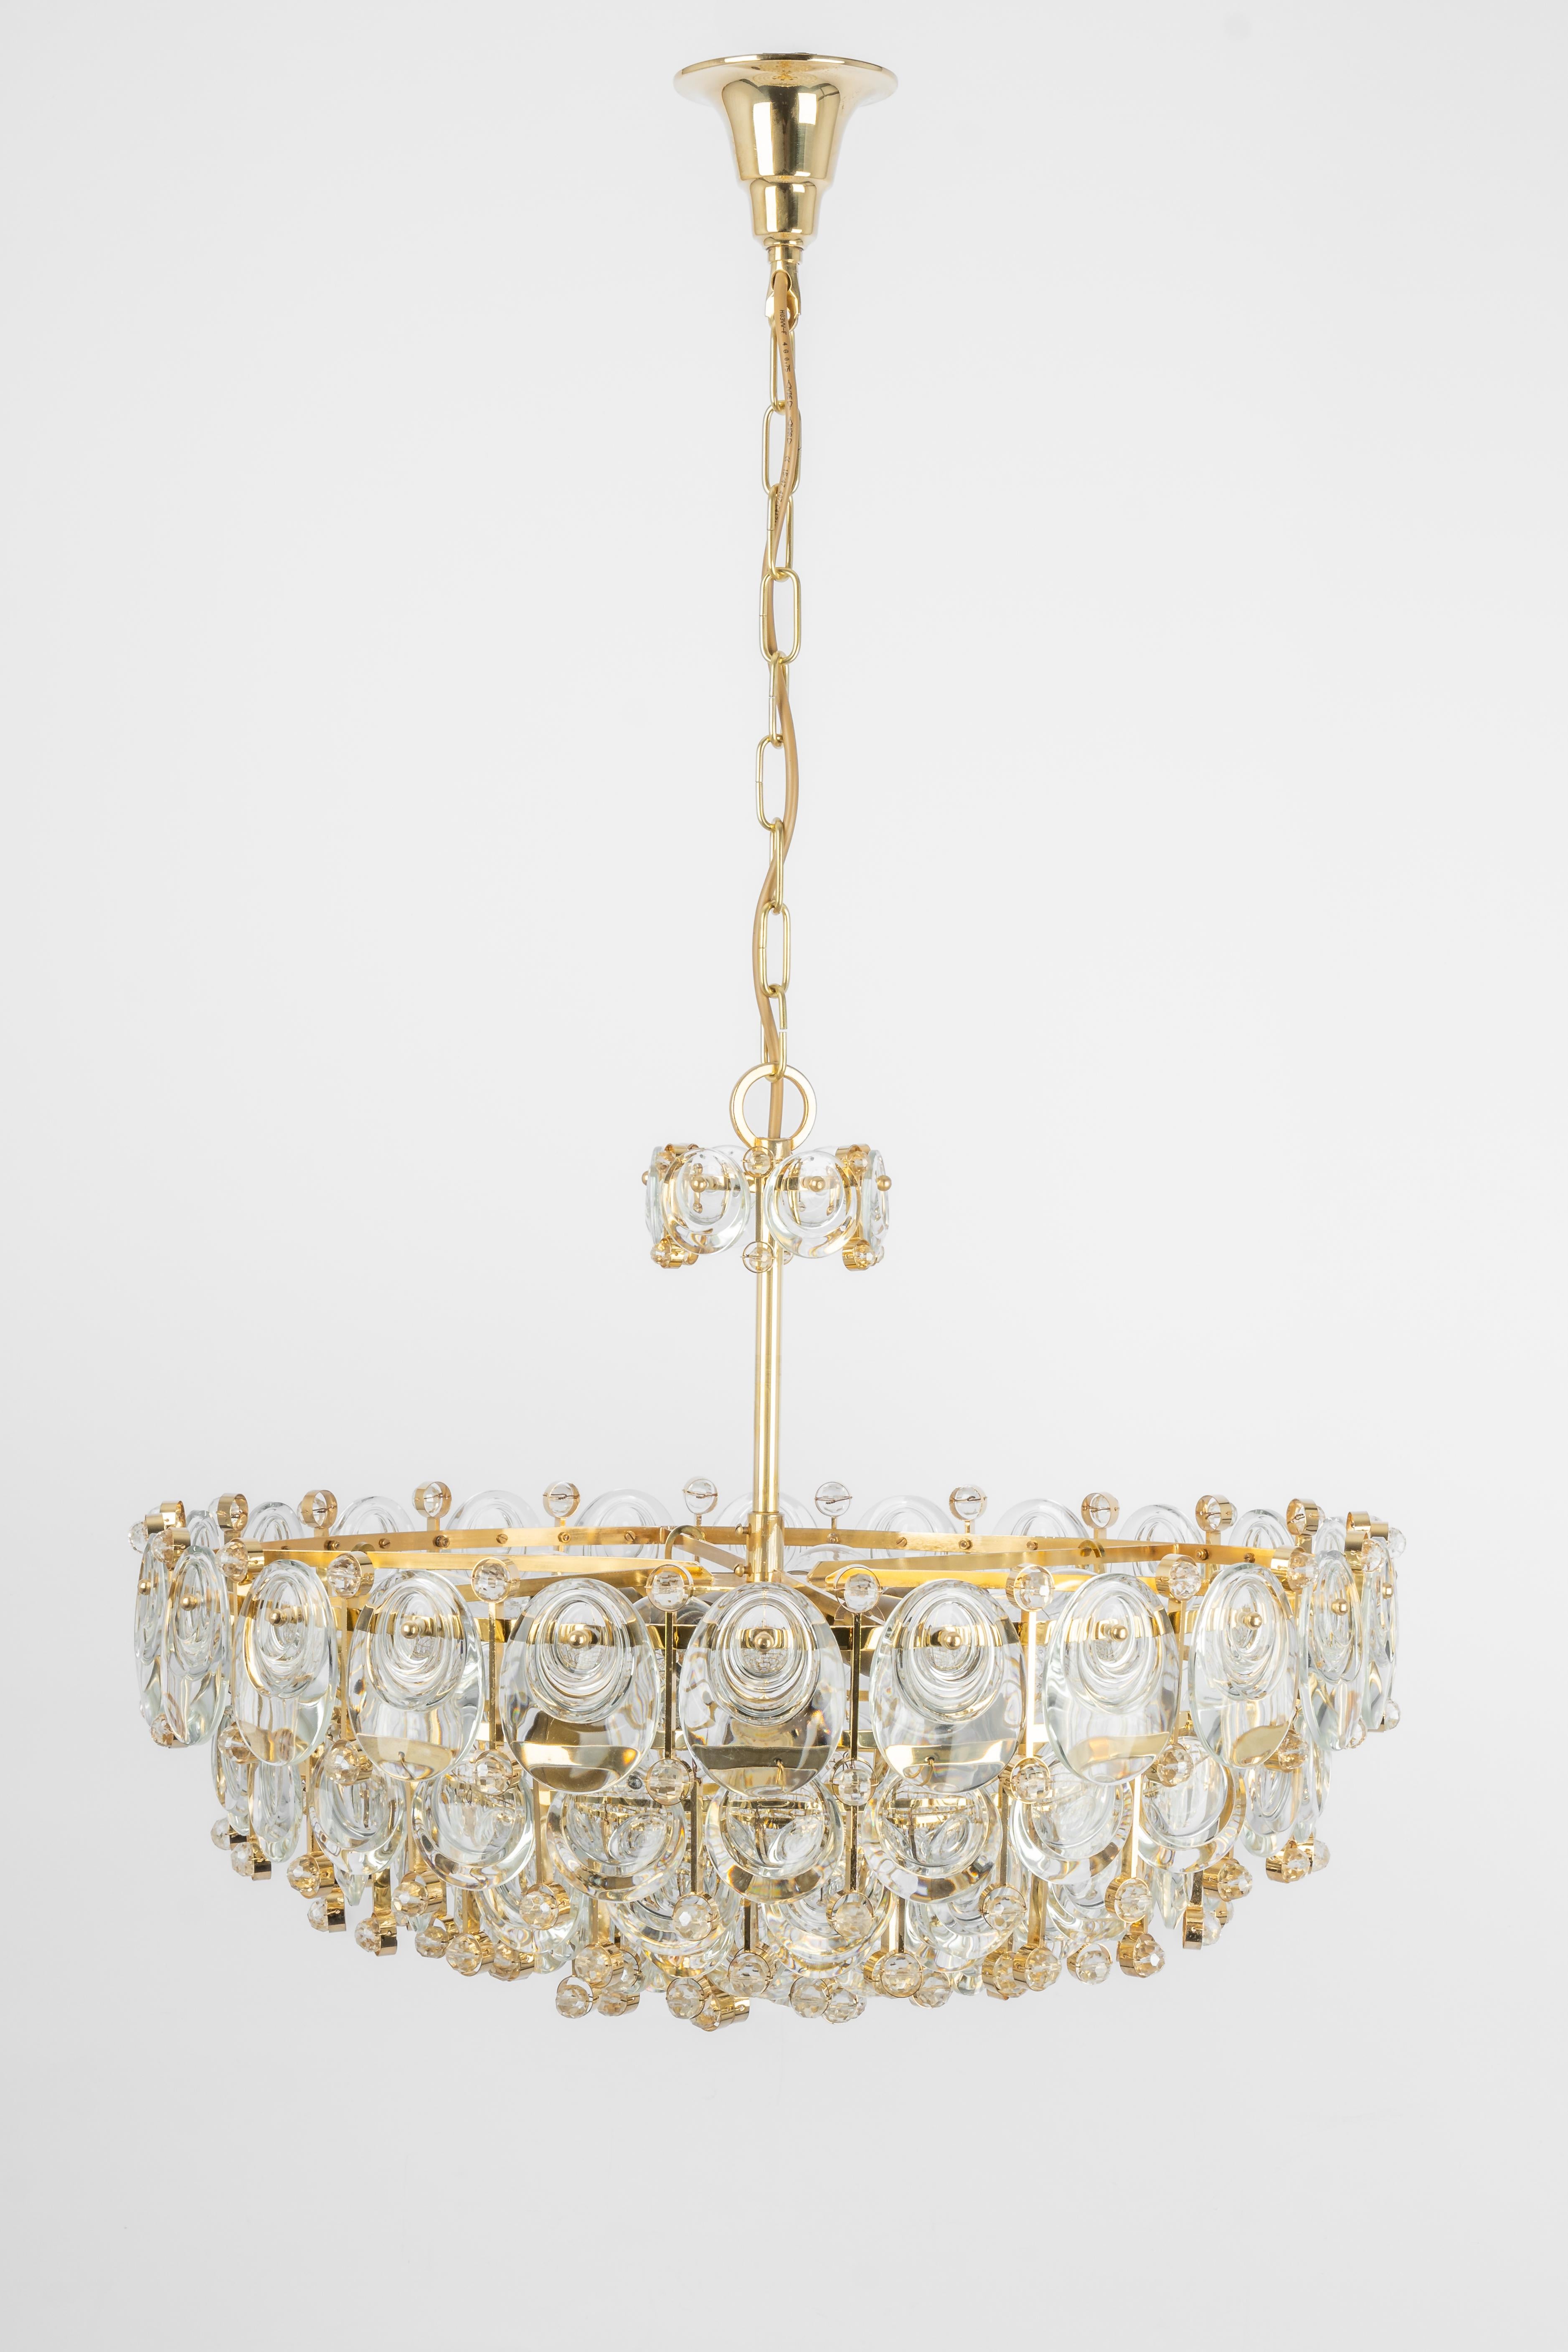 Delicate Gilt Brass Crystal Chandelier by Palwa, Sciolari Design, Germany, 1970s For Sale 3